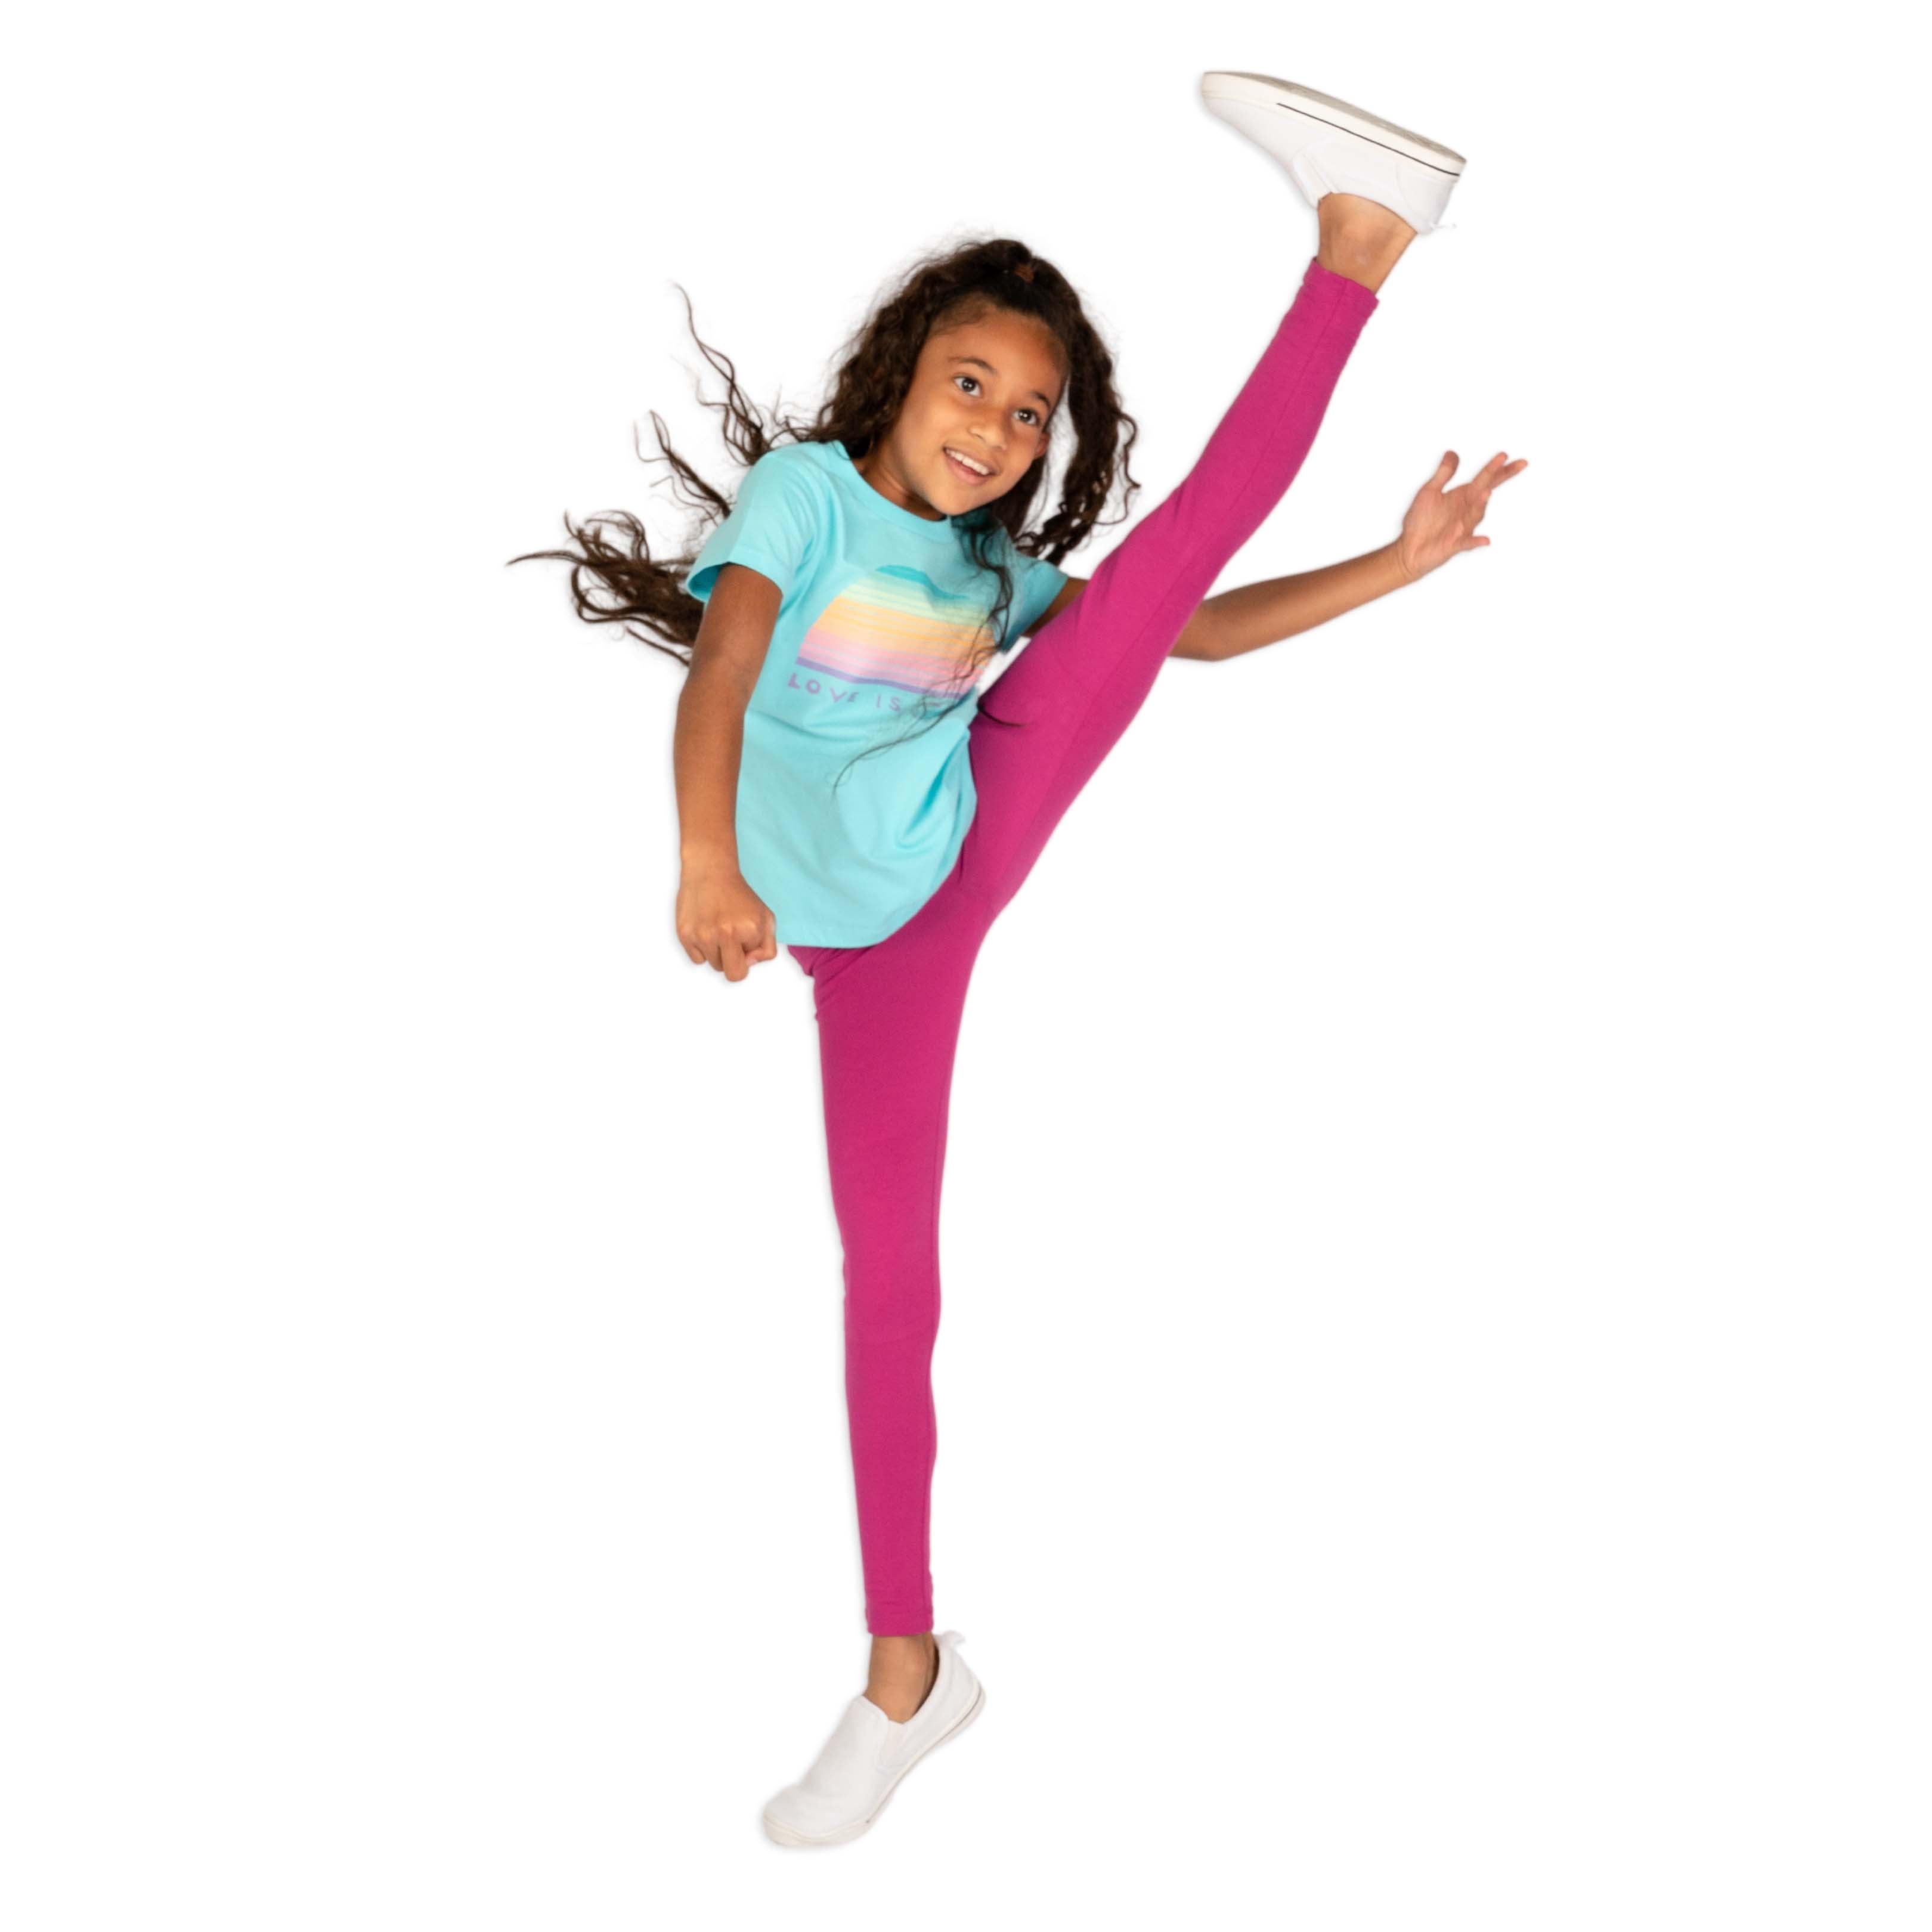 Smarty Girl Sloth Leggings 1-10Y  Explore Science in Style – Smarty Girl &  Co.